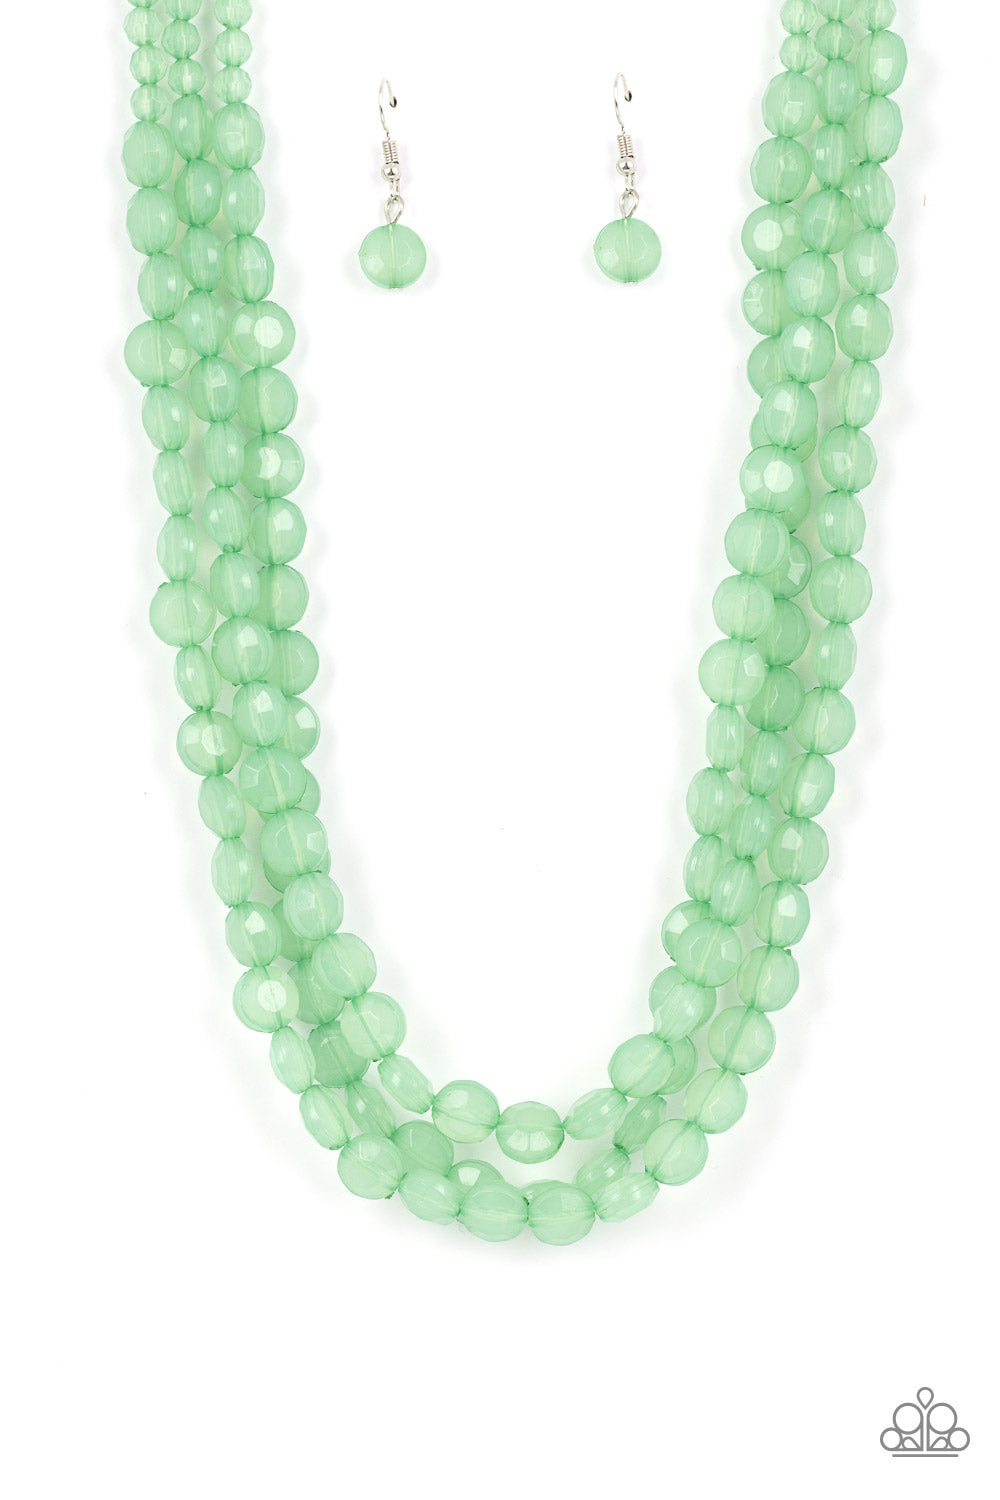 Boundless Bliss Green Necklace